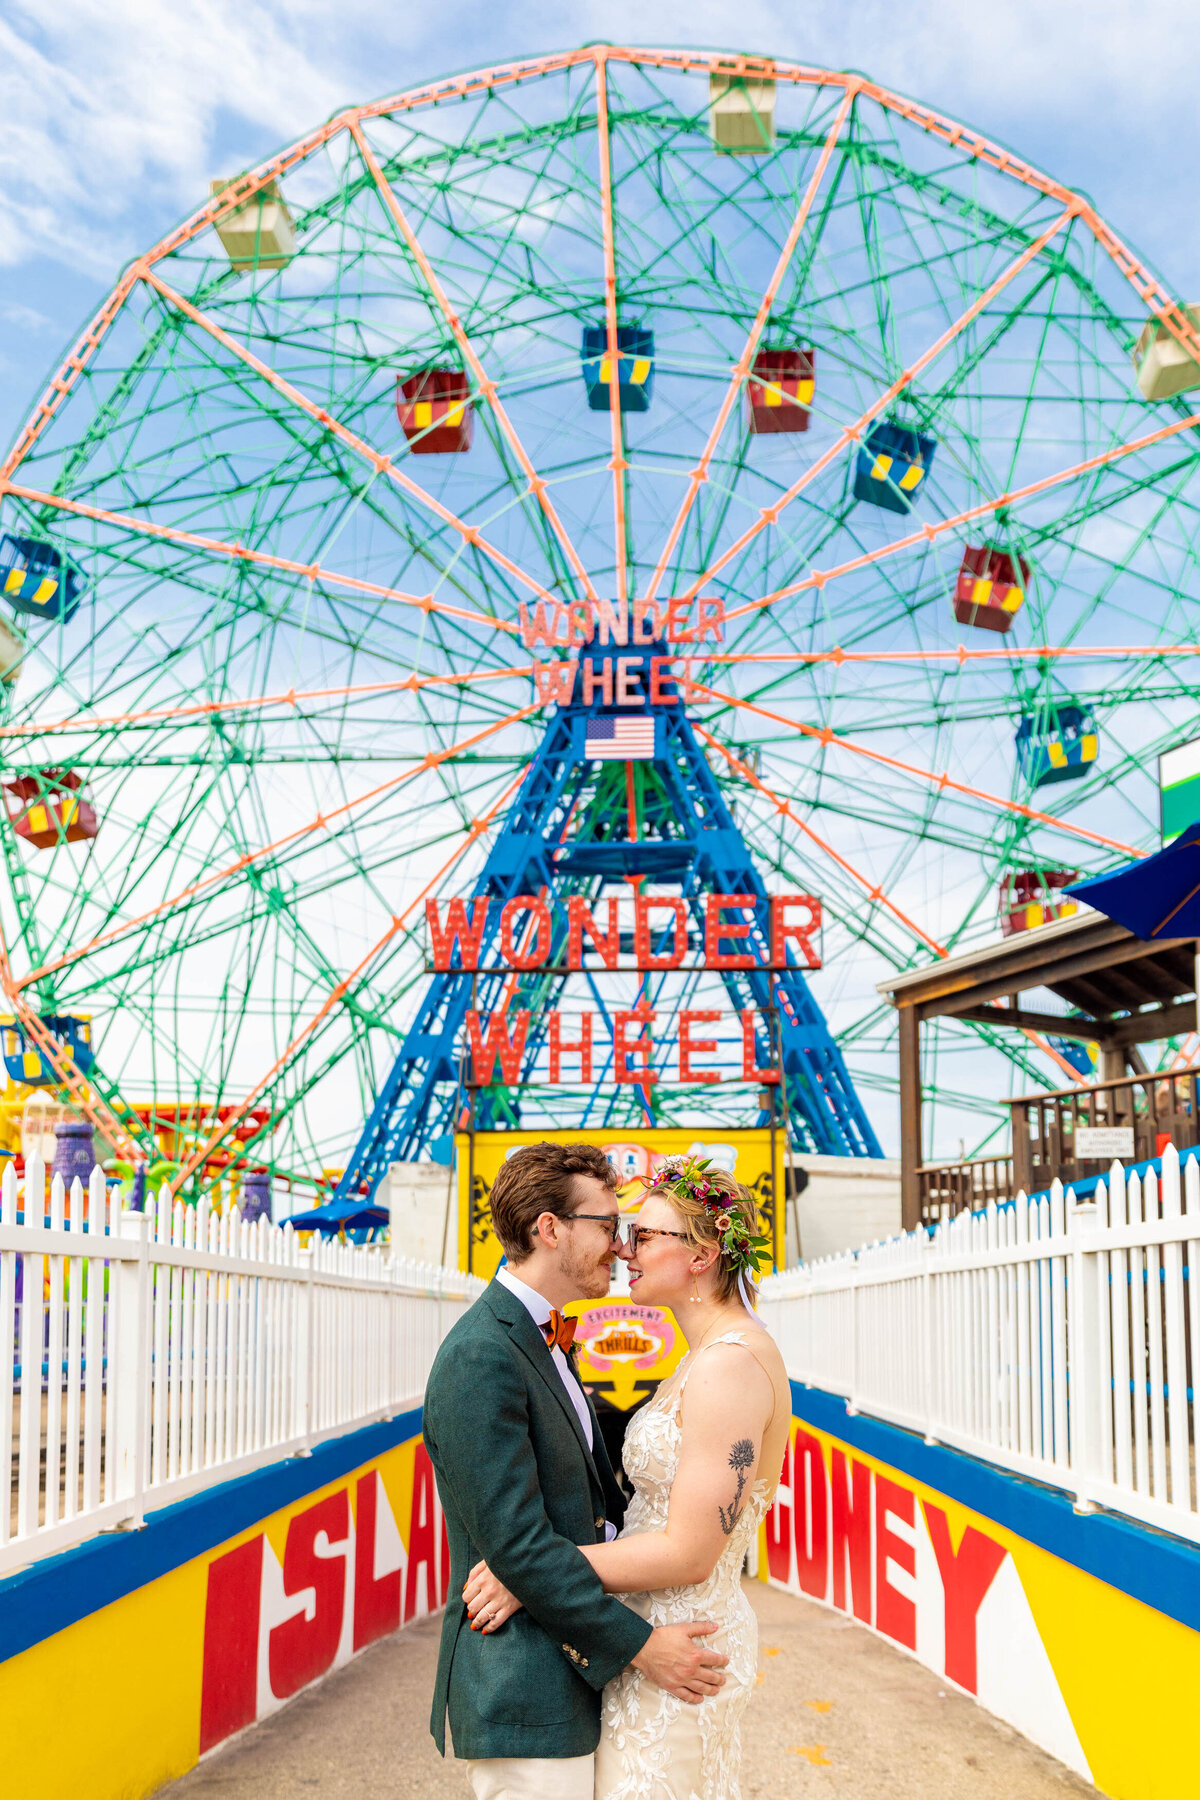 A couple with their arms around each other standing nose to nose in front of a ferris wheel on a pier.